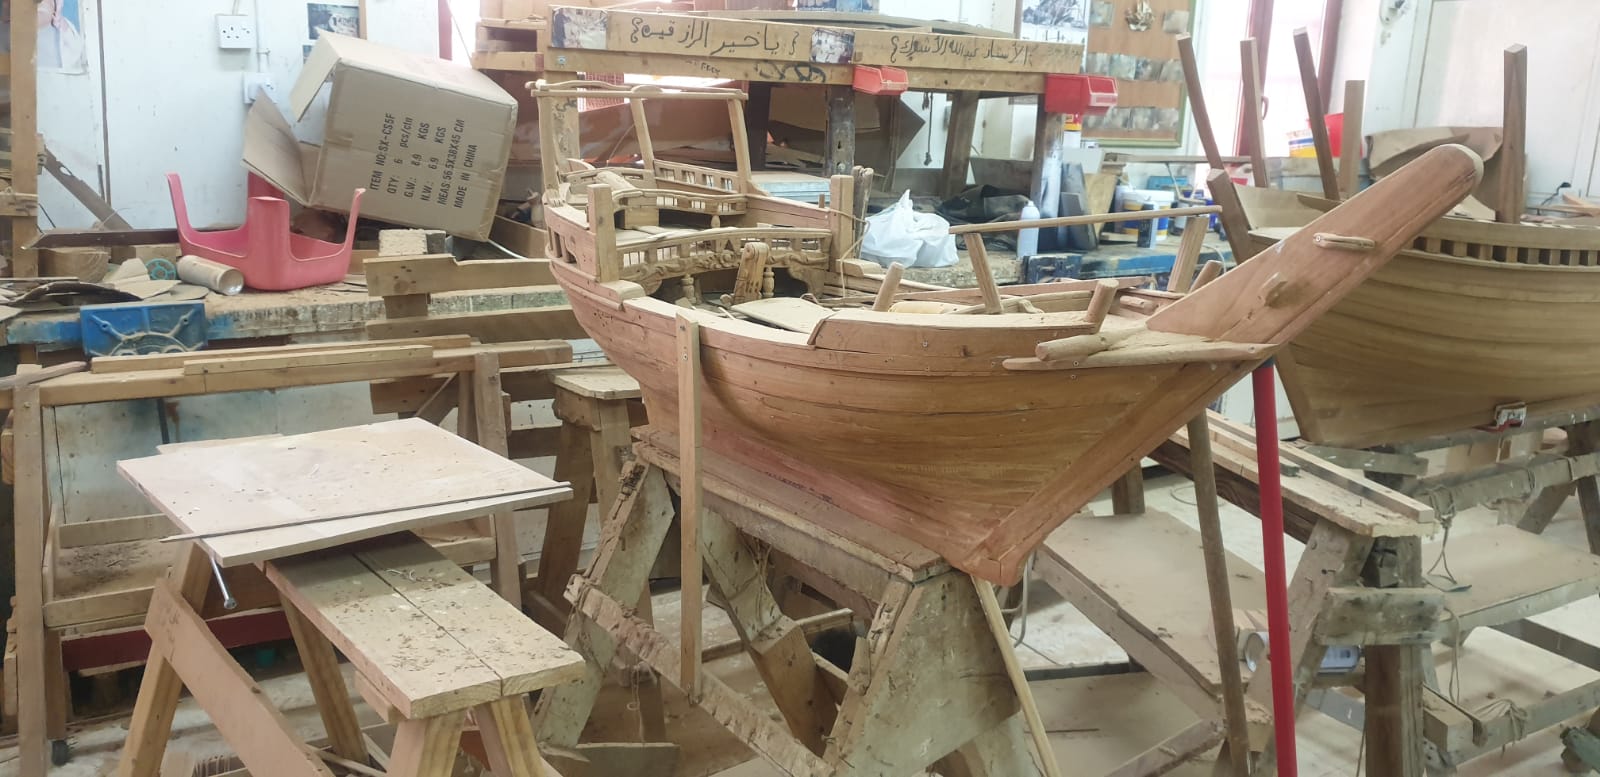 Preserving Kuwait's heritage: Dhow making